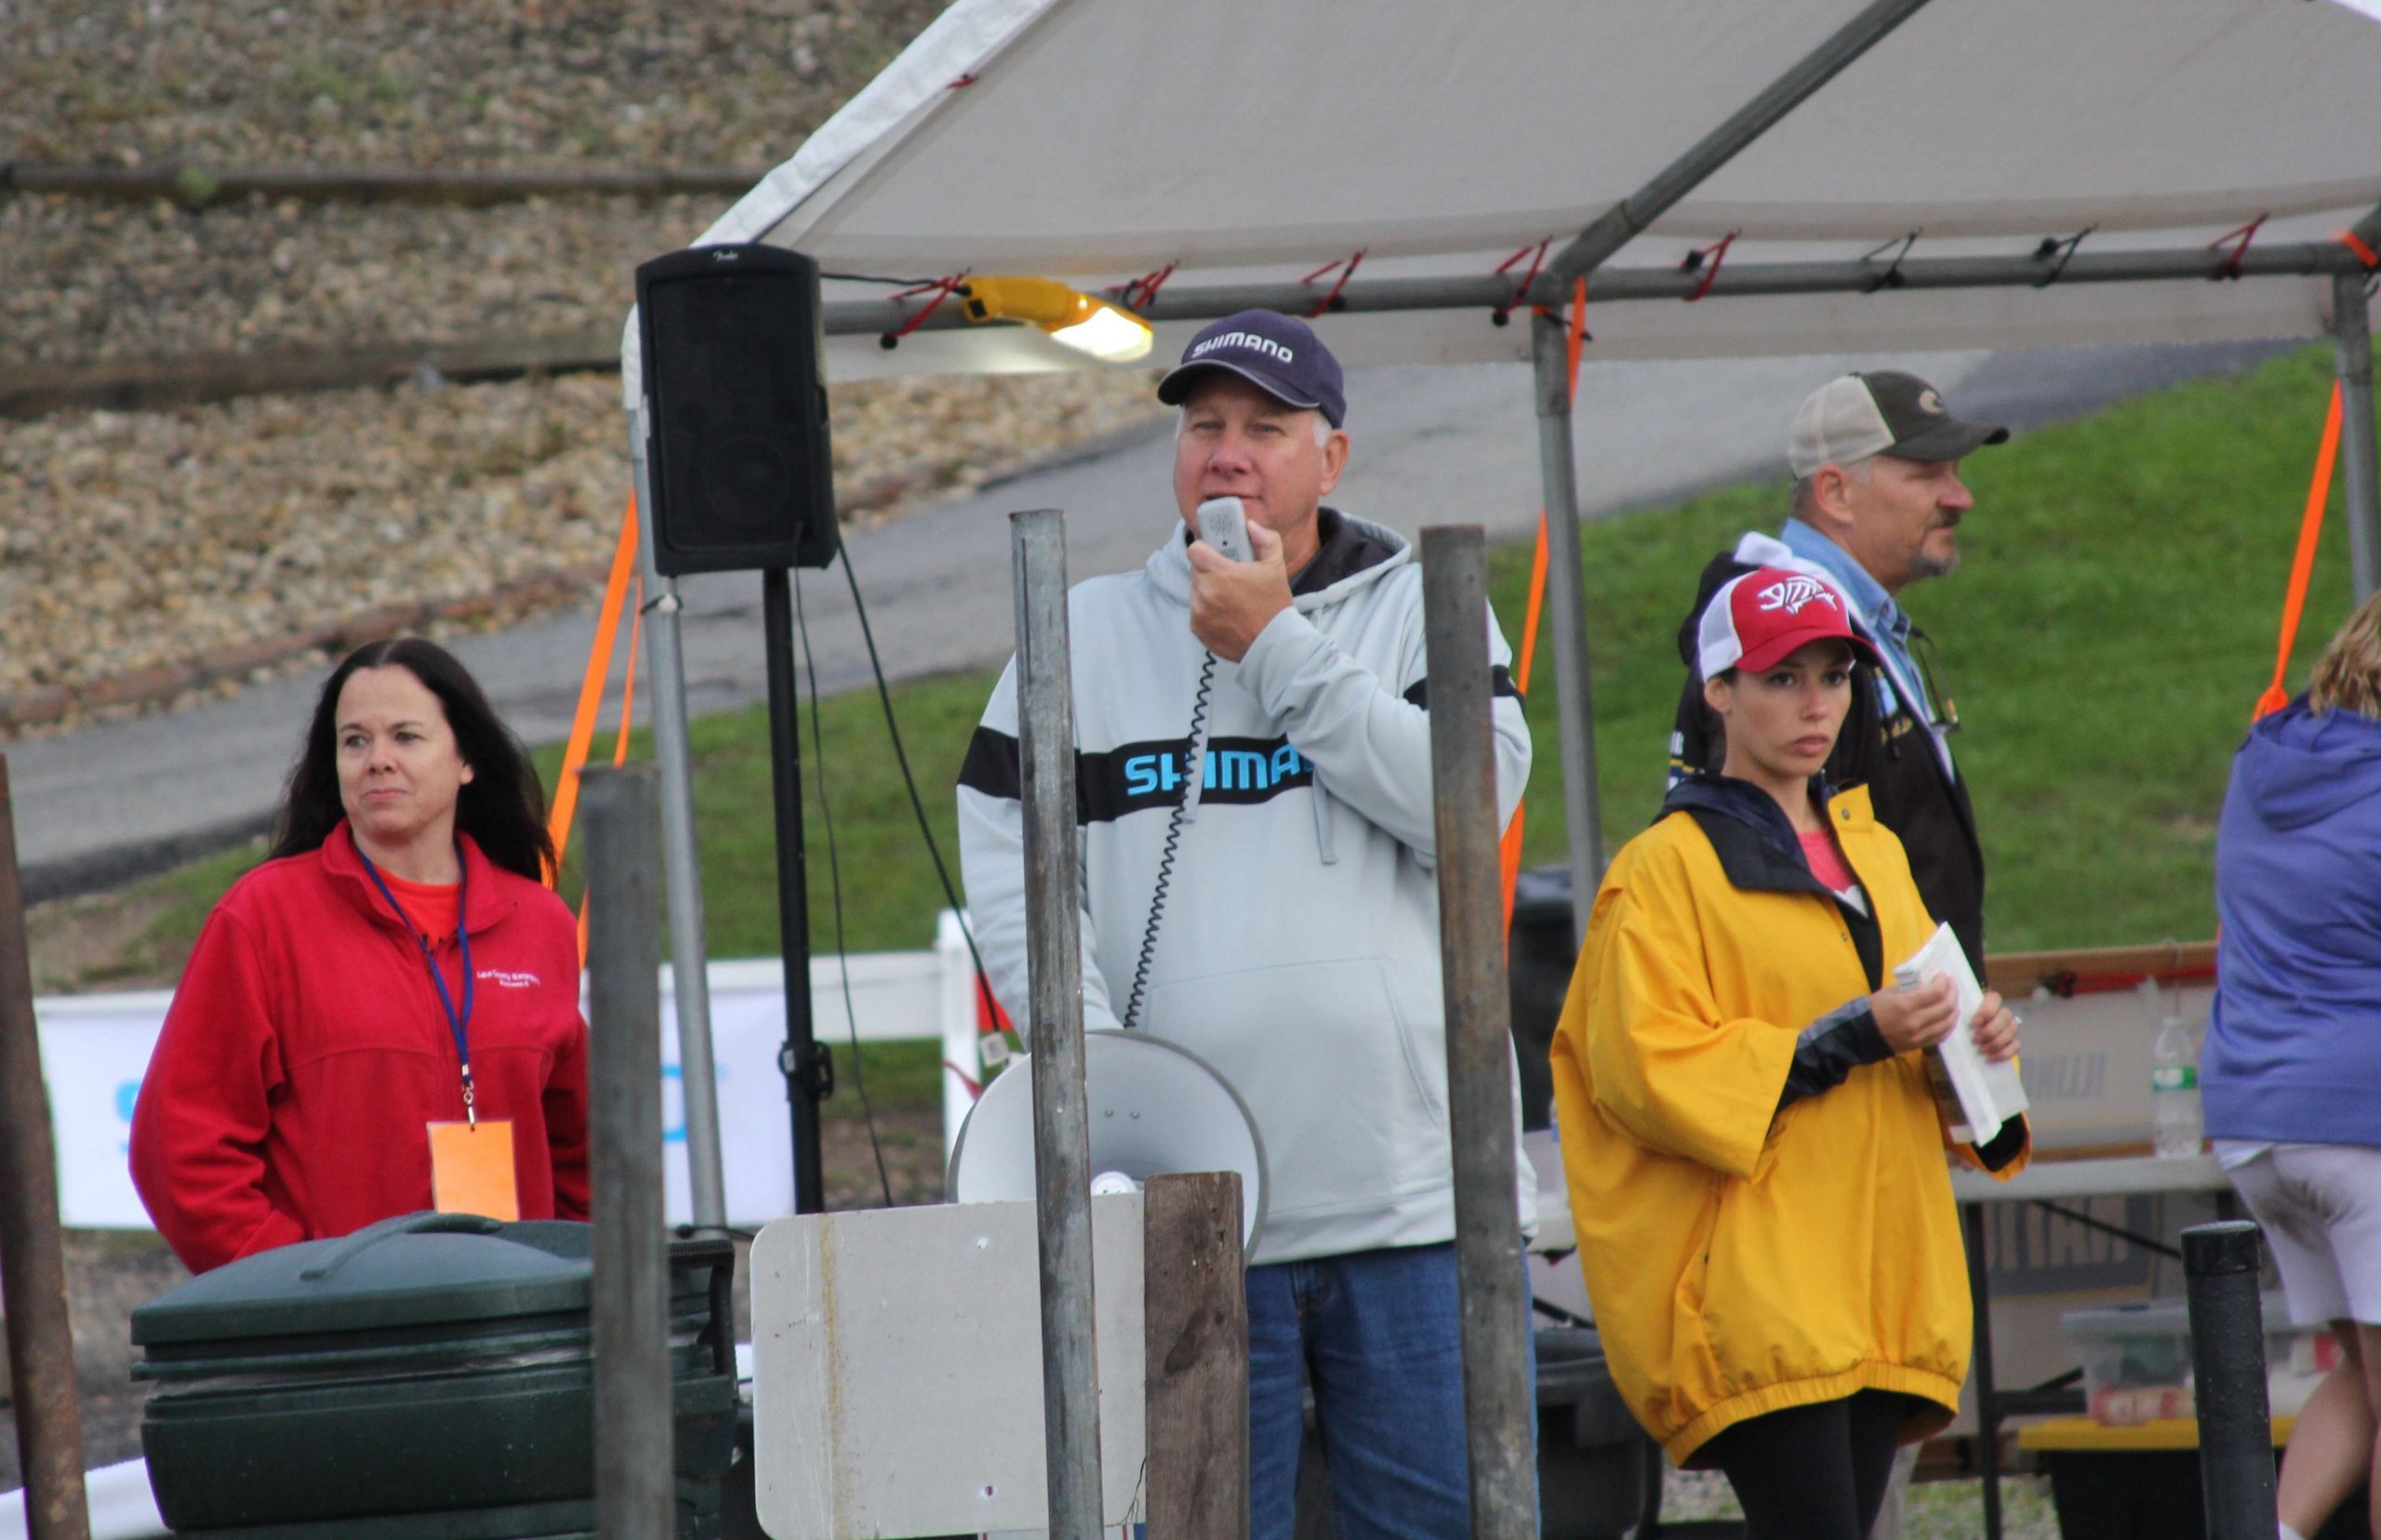 The date was September 11, and the inaugural Bryan Bickell Celebrity Bass Tournament on Bangs Lake in Wauconda, Illinois, began with a solemn tribute at the docks of Wauconda Boats. Tournament organizer and emcee Frank Hyla, Shimano pro staff member and host of the 